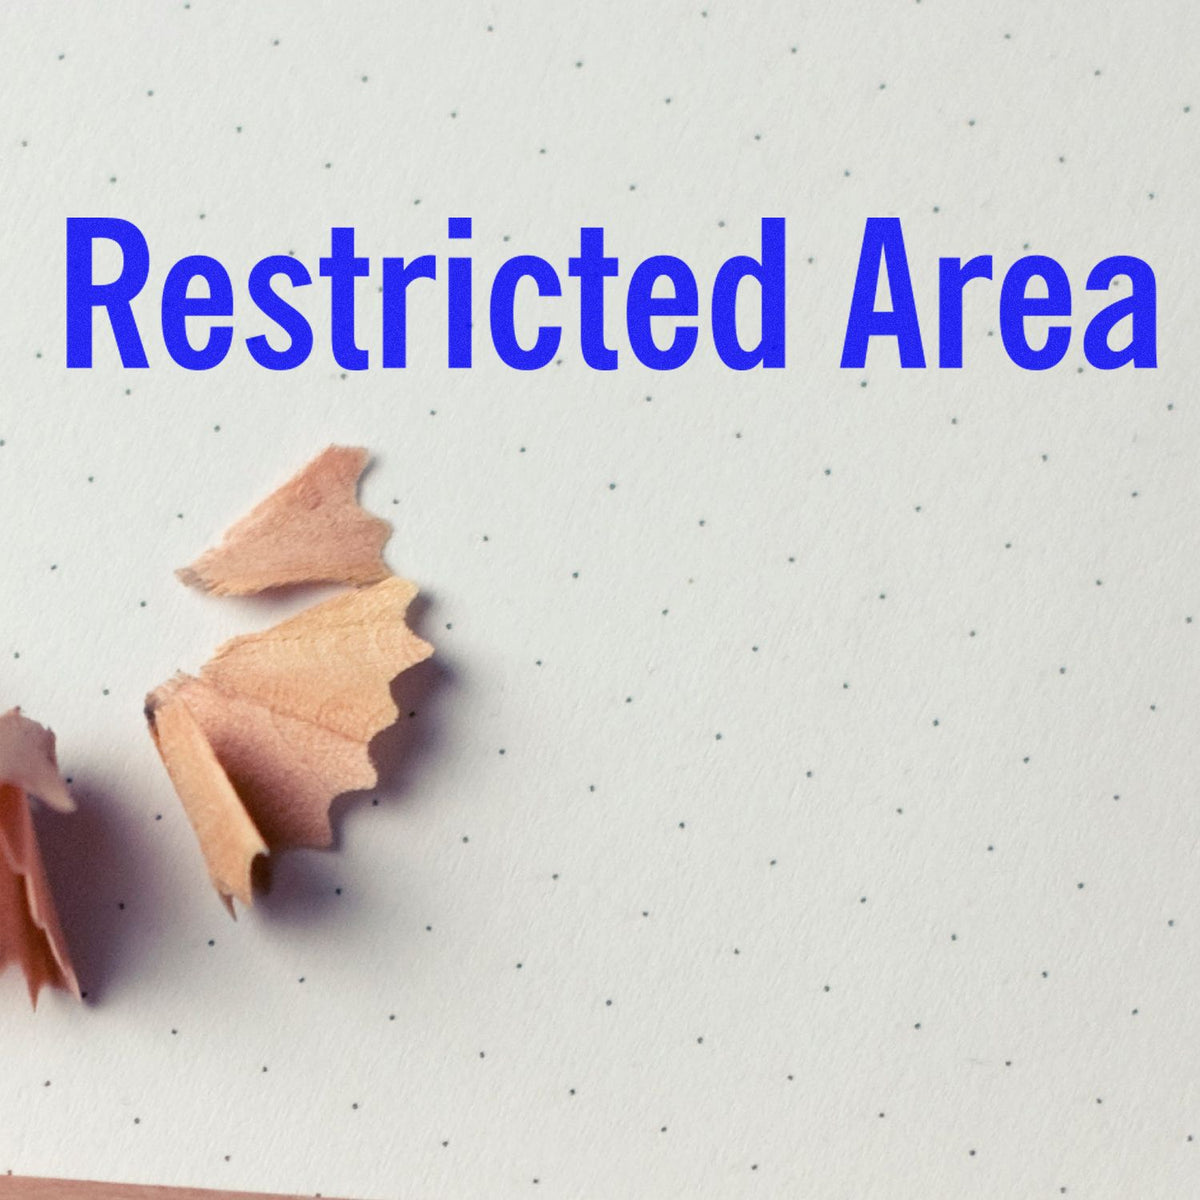 Large Self-Inking Restricted Area Stamp In Use Photo